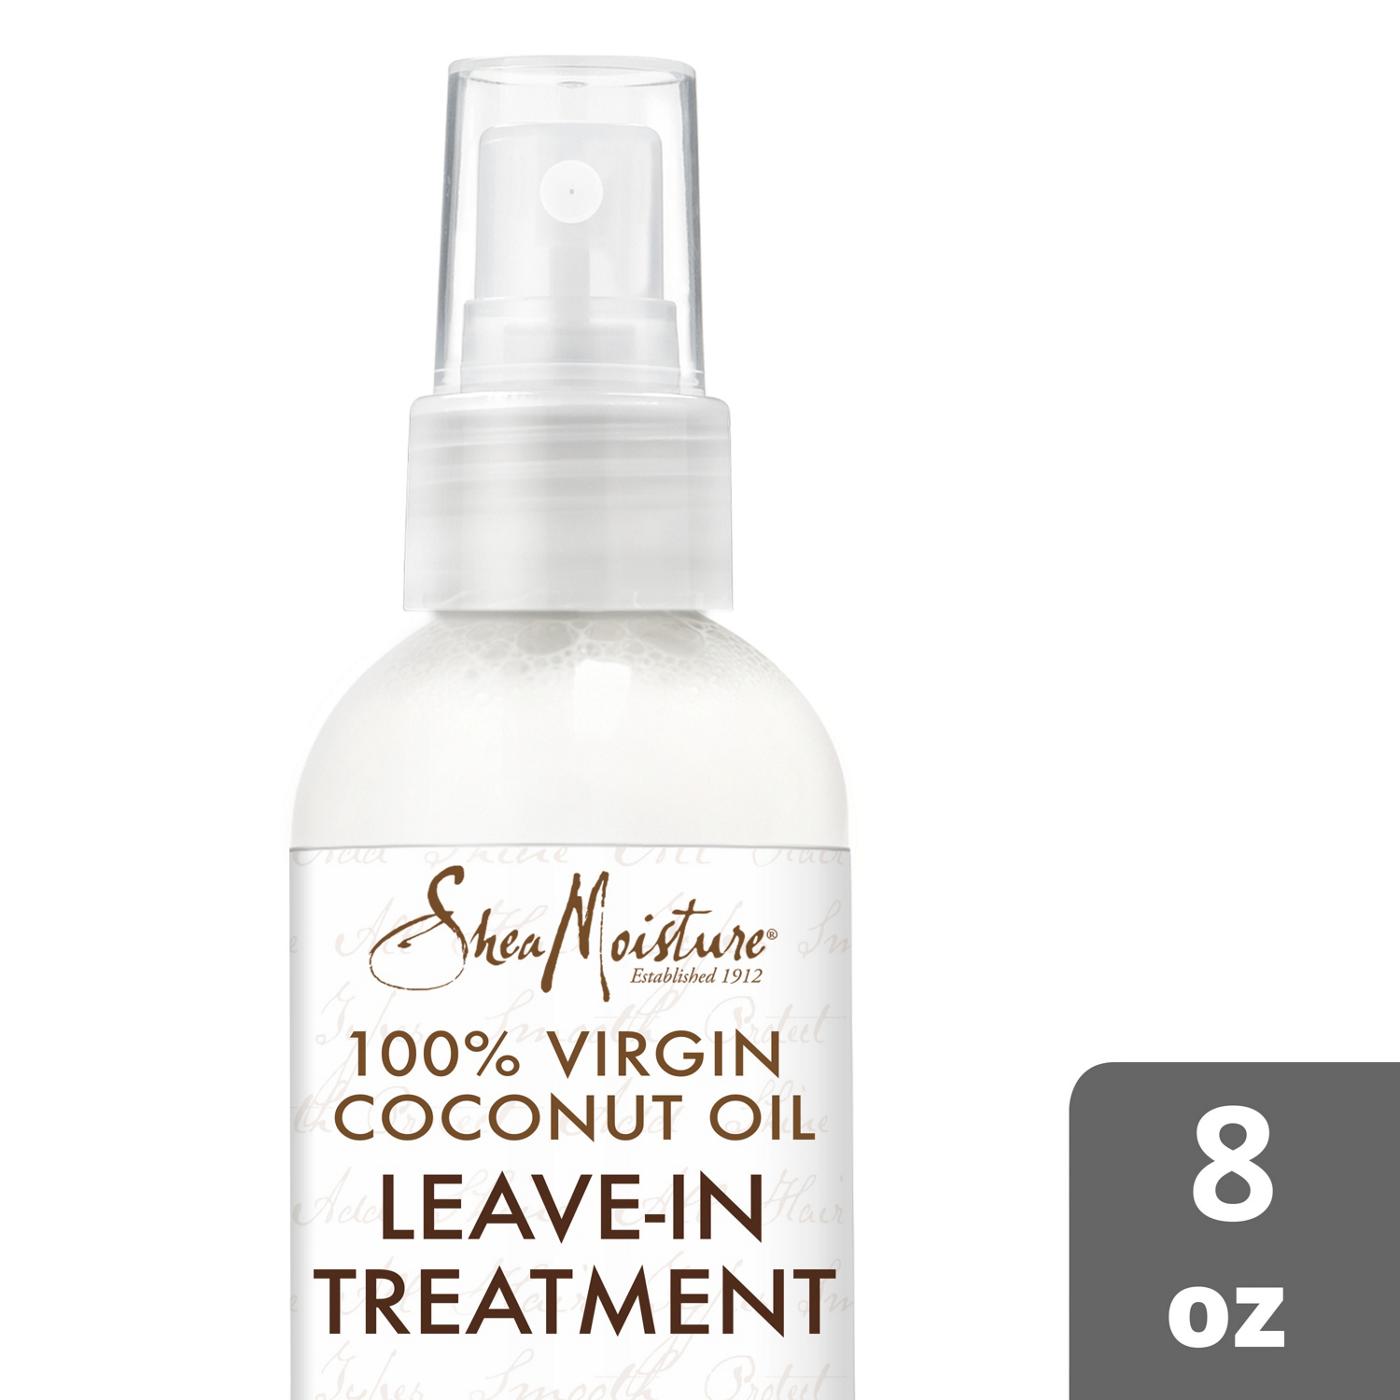 SheaMoisture Virgin Coconut Oil Leave-In Treatment; image 5 of 7